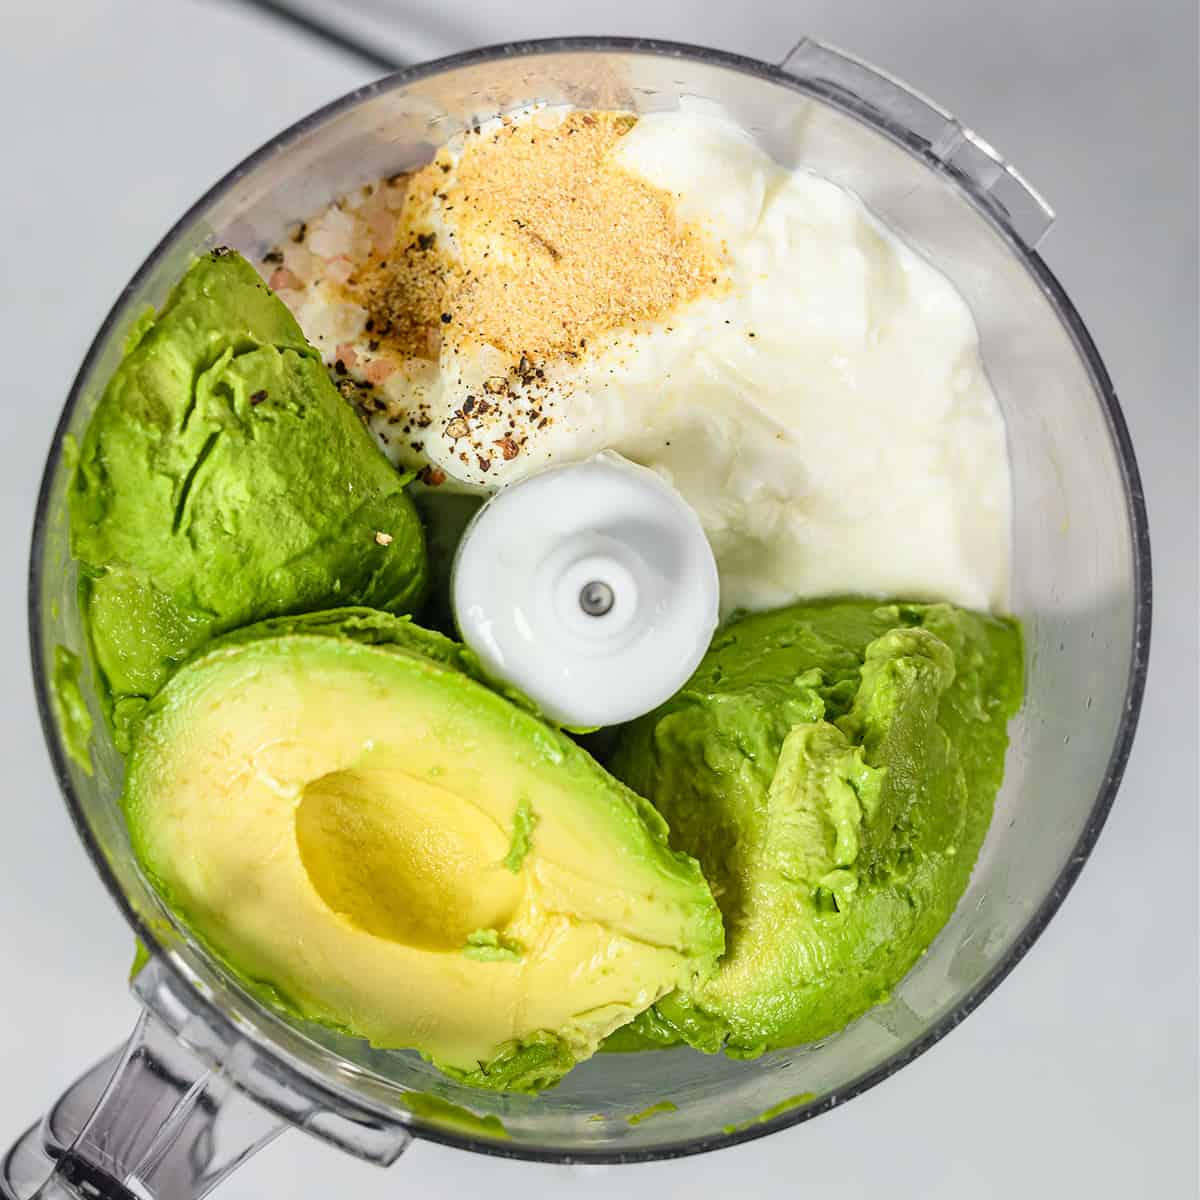 ingredients for avocado crema in the food processor